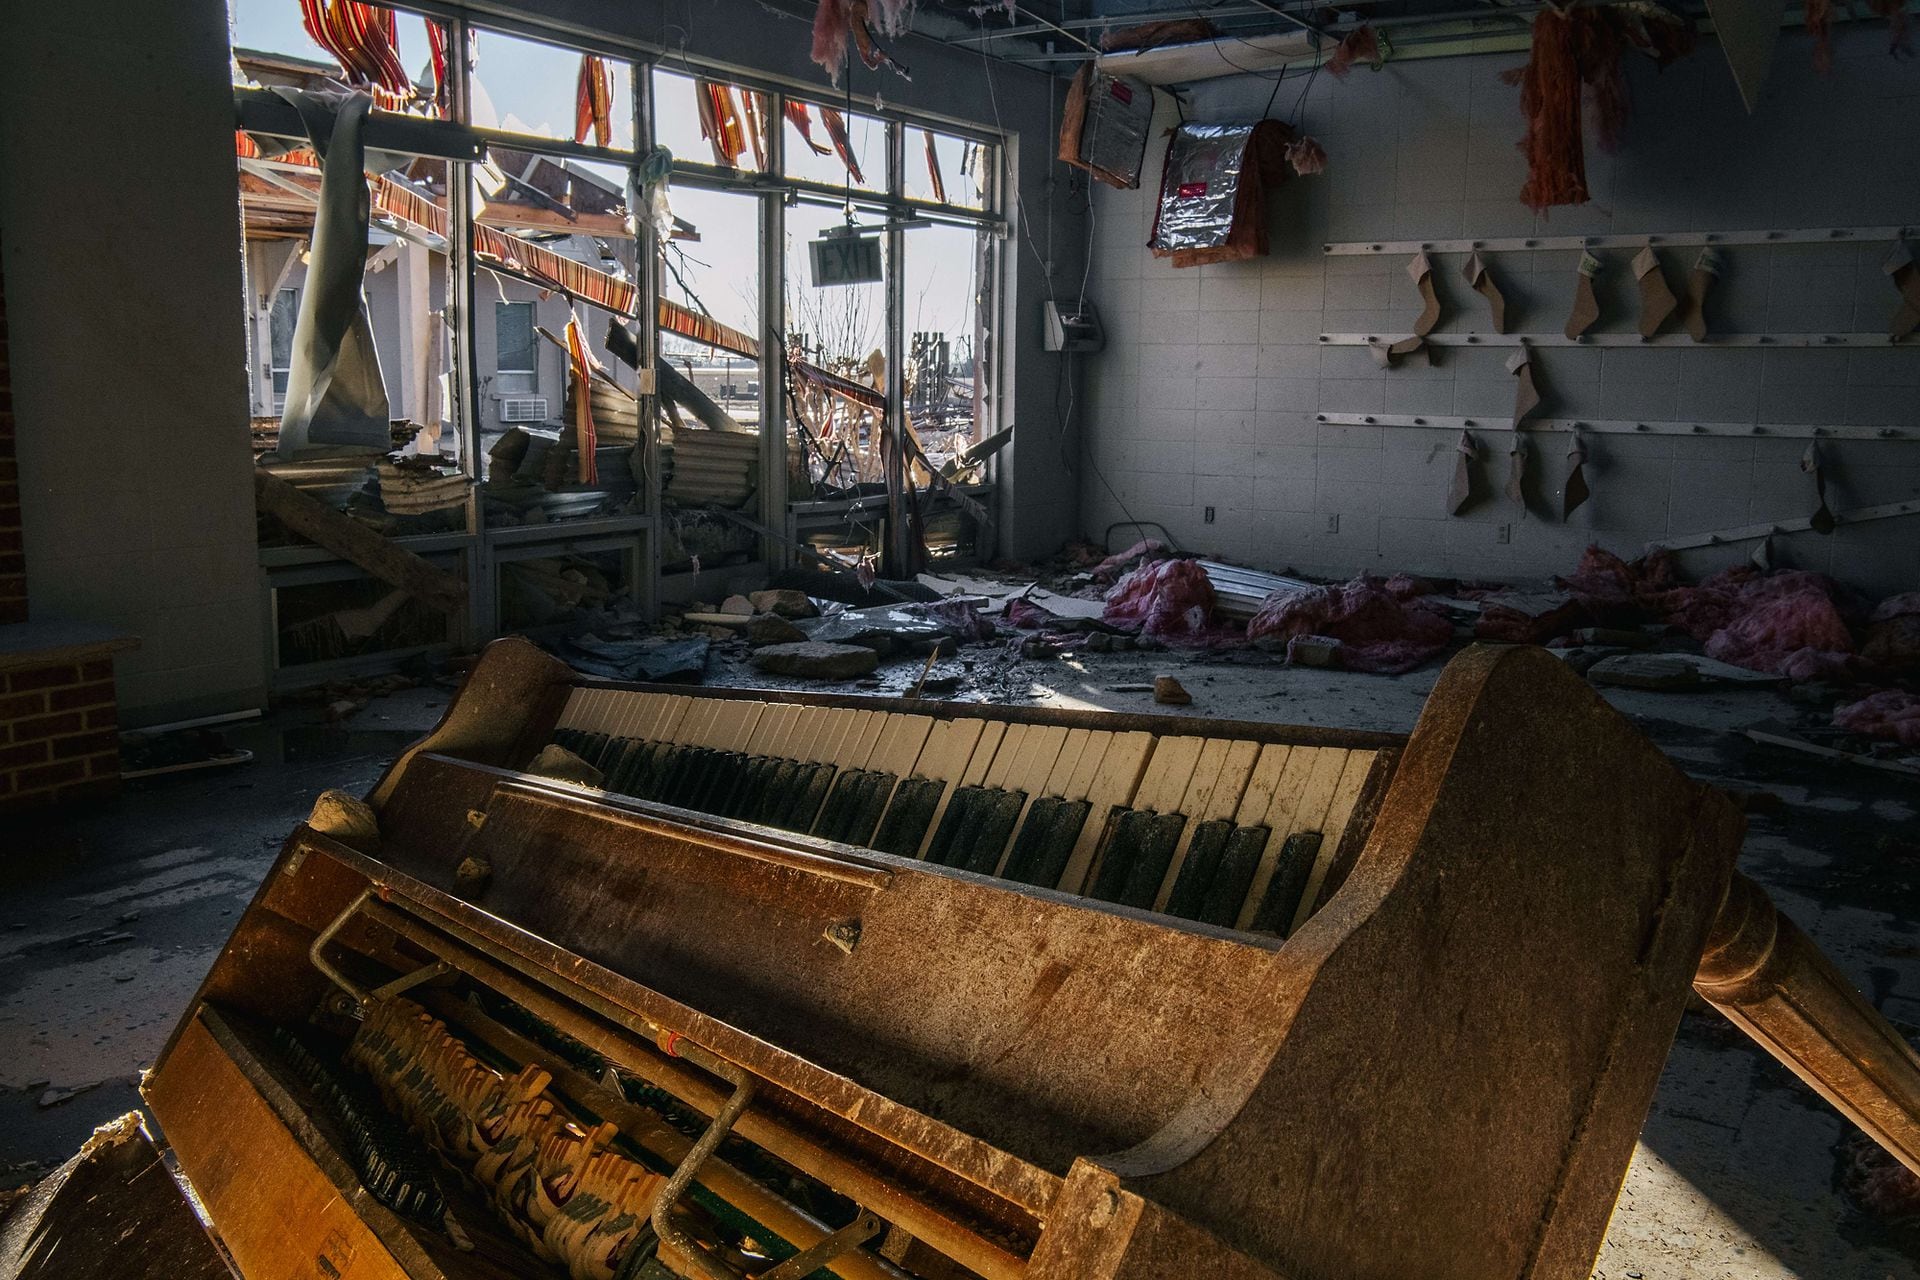 On December 12, 2021, a damaged piano was found in the lobby of the Monette Manor Retirement Home in Monet, Arkansas.  A nursing home where 67 elderly people were staying was hit by a hurricane on December 10, killing an 80-year-old man.